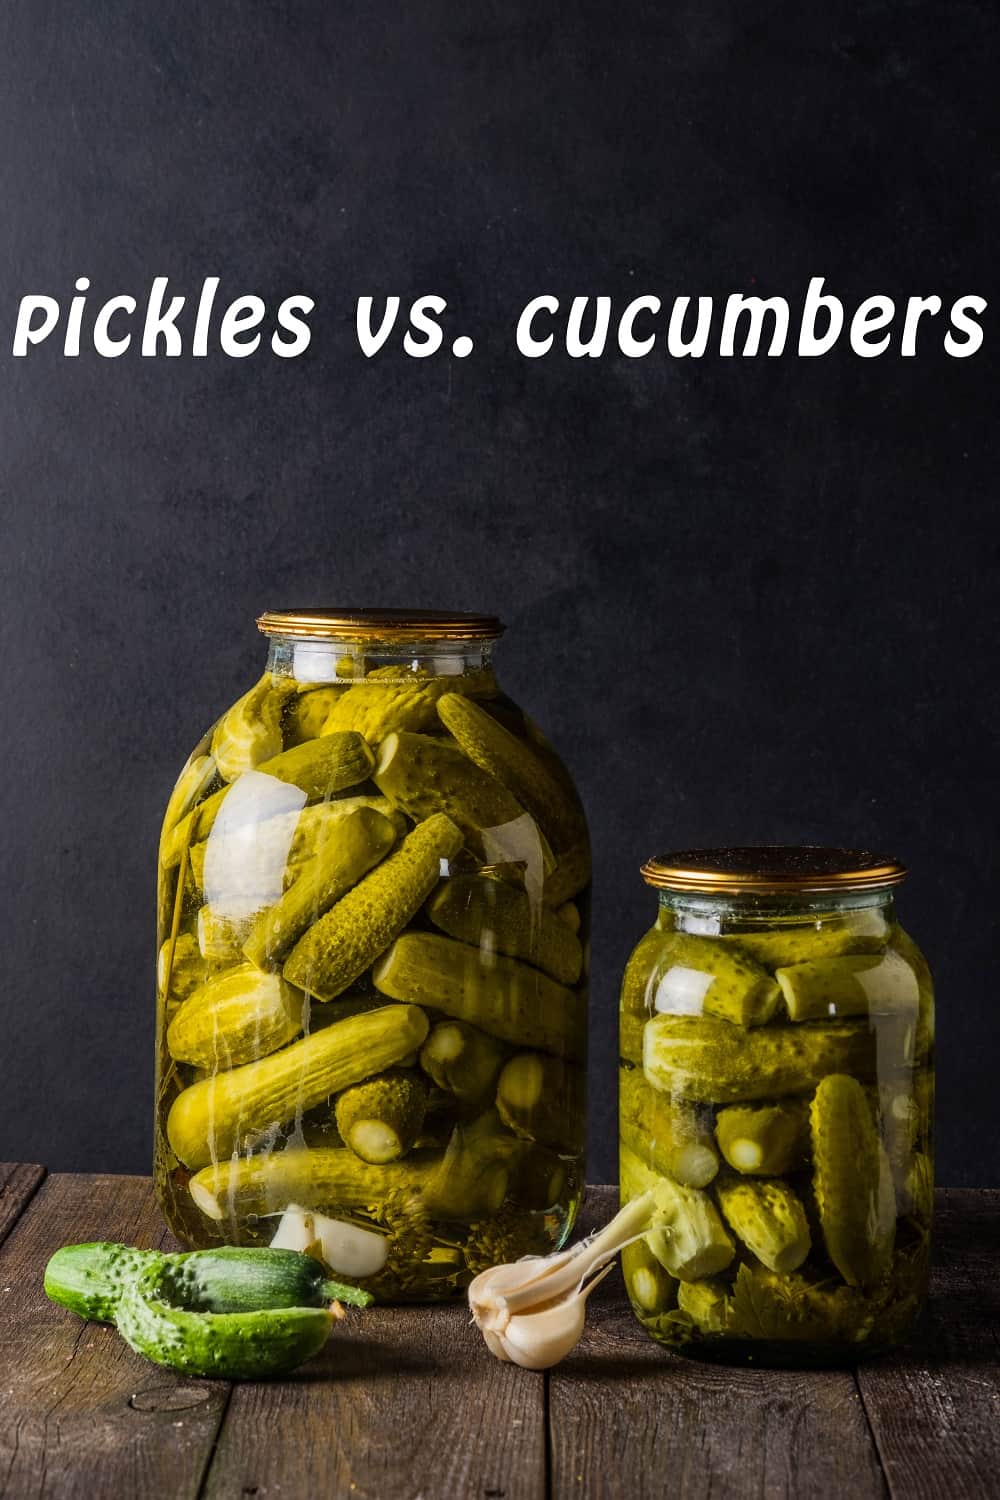 life lessons learned late  - “I had to discover that pickles are cucumbers by reading it on Reddit.” - u/rawker86